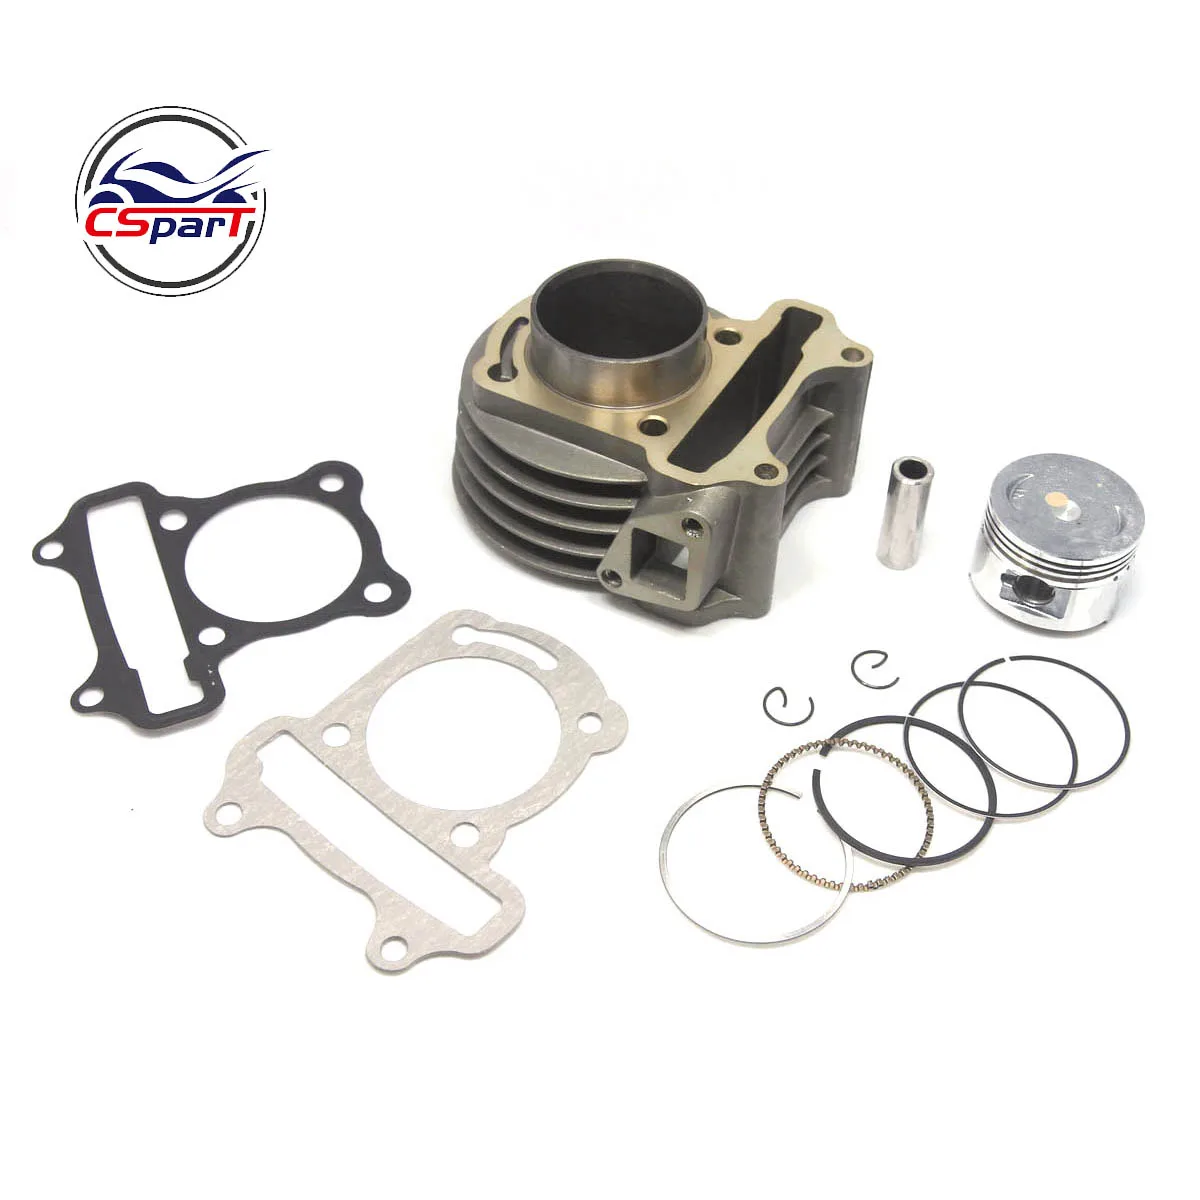 47mm Piston for GY6 139QMB engines ATV Scooter Moped Go Kart MYK Cylinder Kit 80cc 